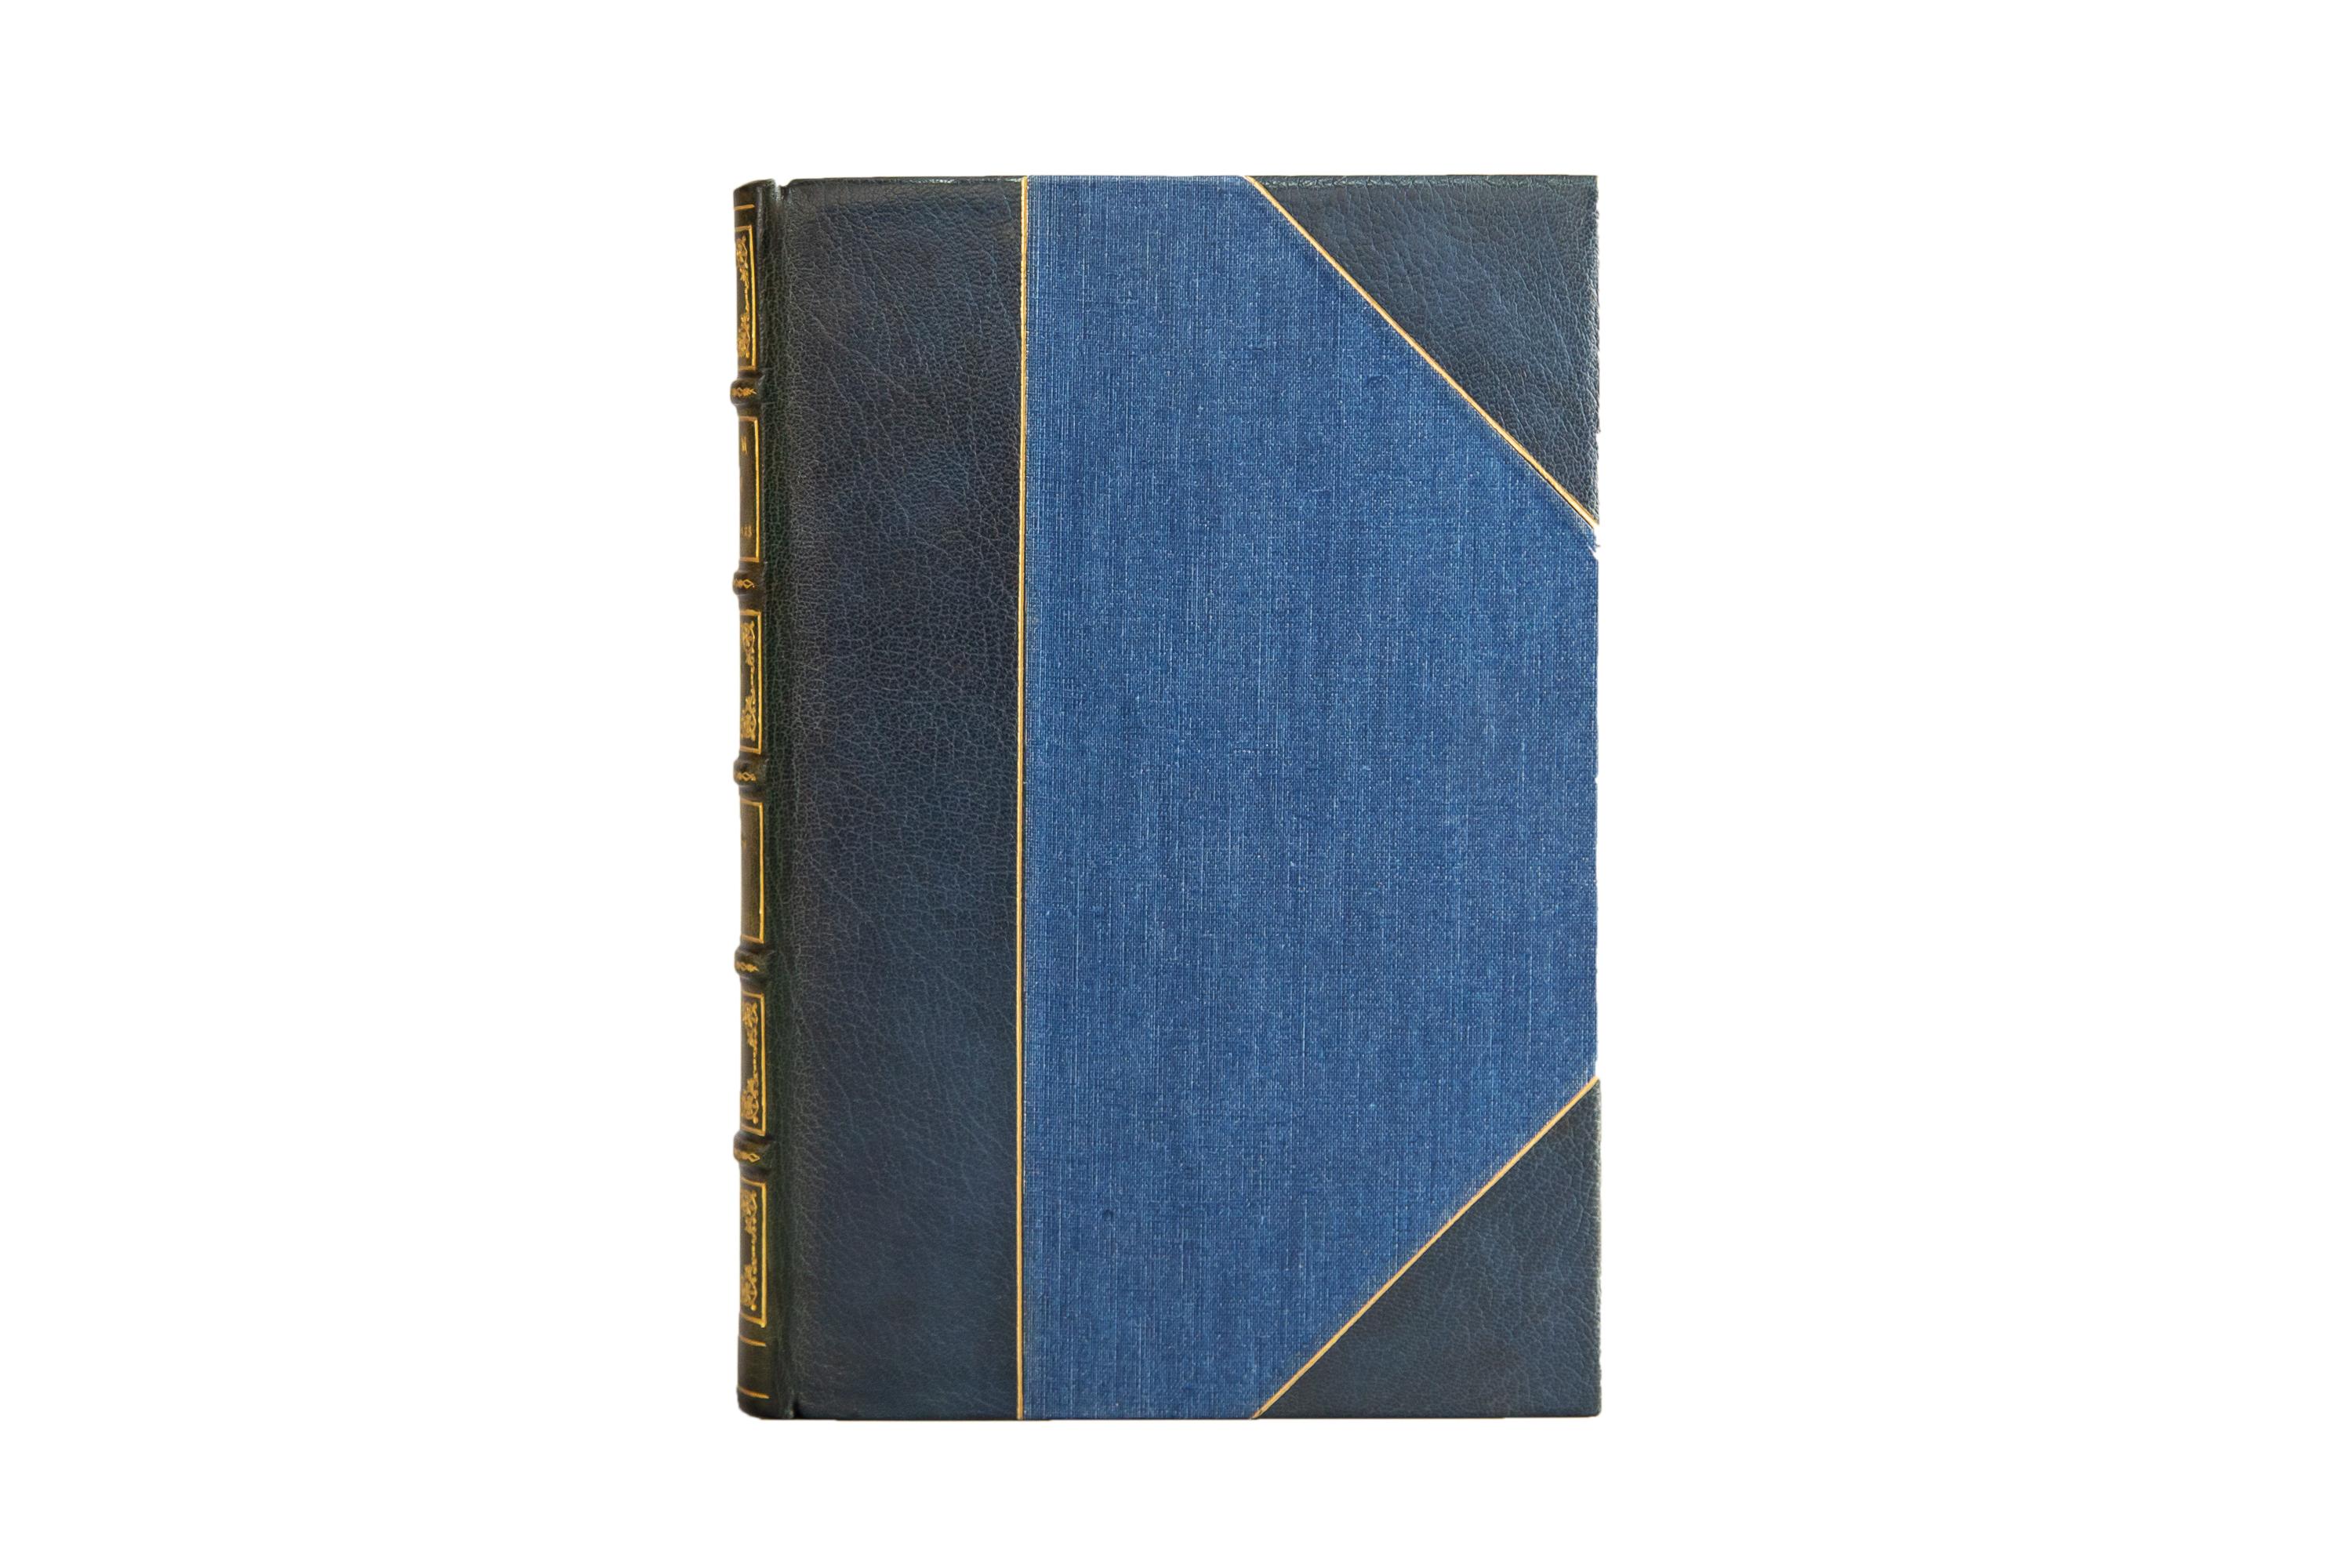 2 Volumes. Carl Sandburg. Abraham Lincoln: The Prairie Years. First Edition. Bound and signed by Maurin in 3/4 navy morocco and linen boards. Raised band spines gilt with ornate Americana gilt detailing. Top edge gilt with marble endpapers. 105